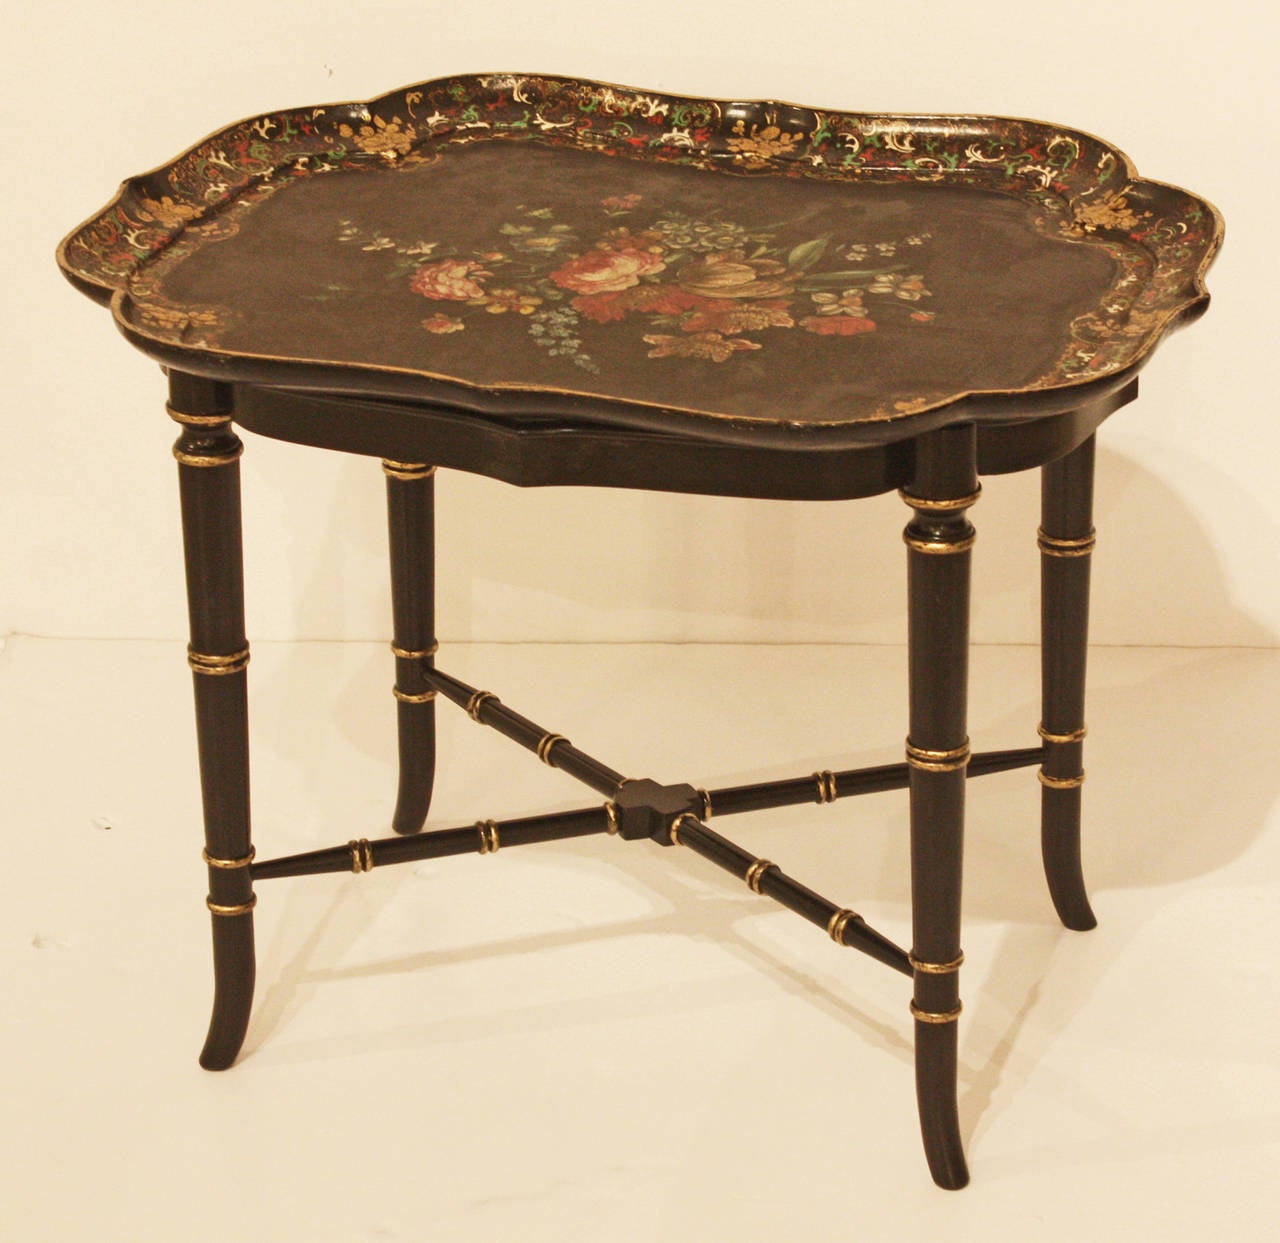 Regency Papier Mâché Tray Table In Excellent Condition For Sale In Dallas, TX